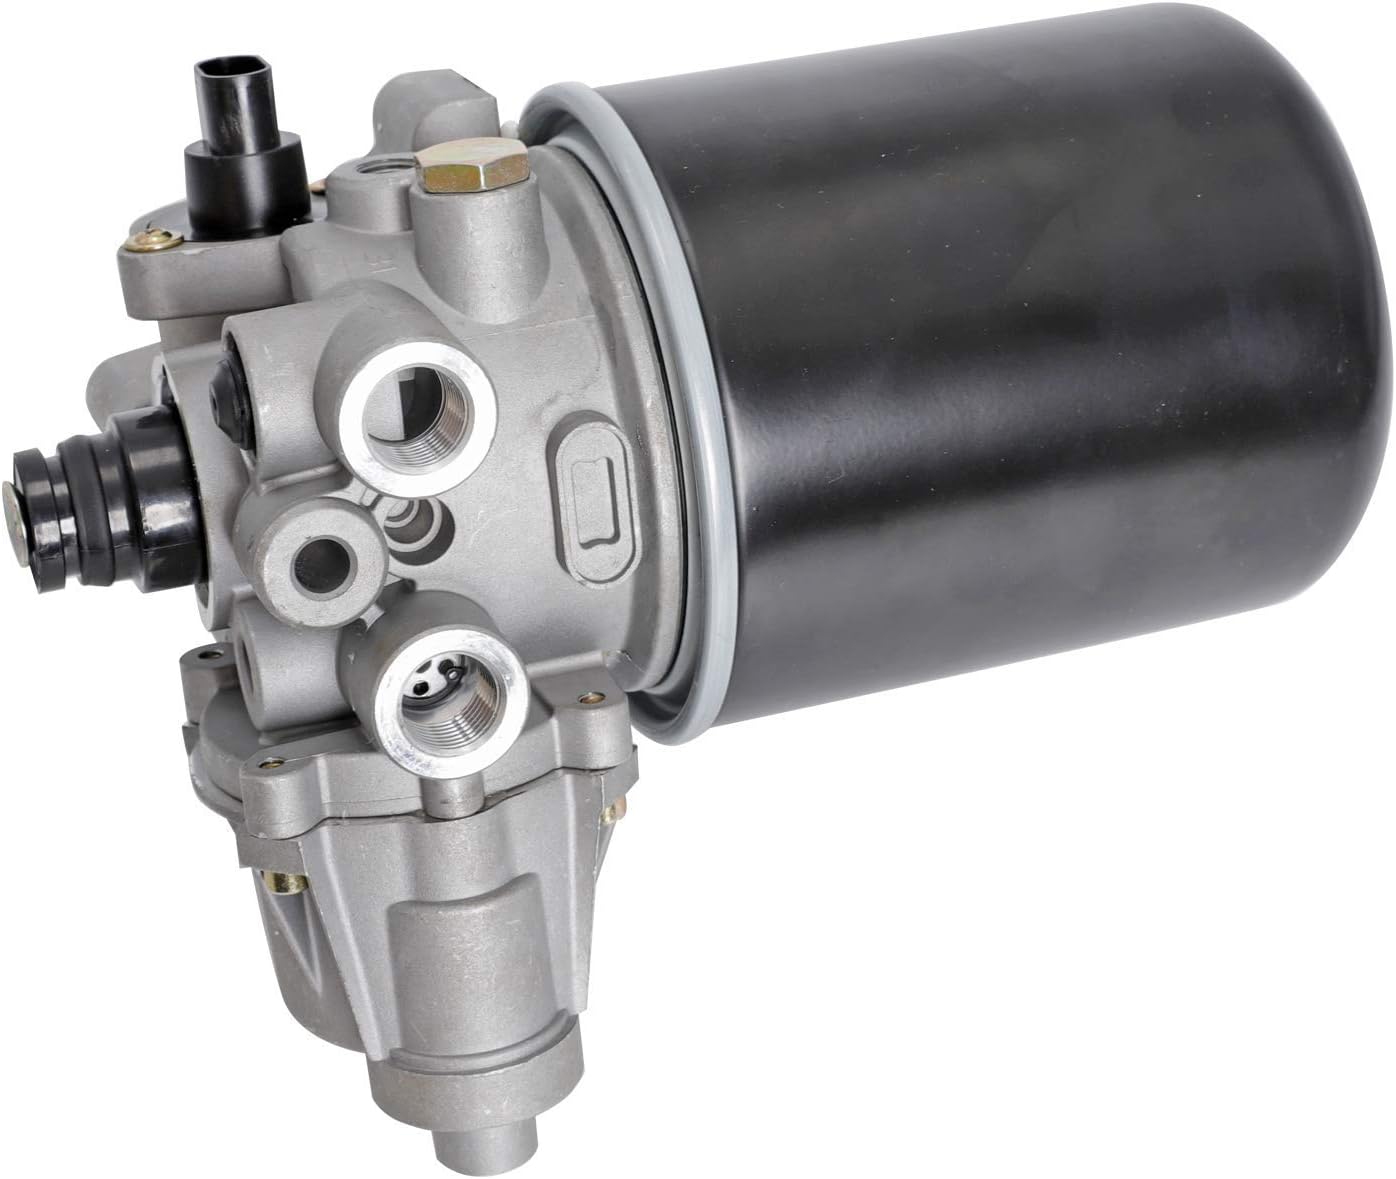 blackhorseracing BLACKHORSE-RACING Air Dryer Assembly - Compatible with Meritor Wabco System Saver 1200 Series Meritor Style Replaces R955205 43